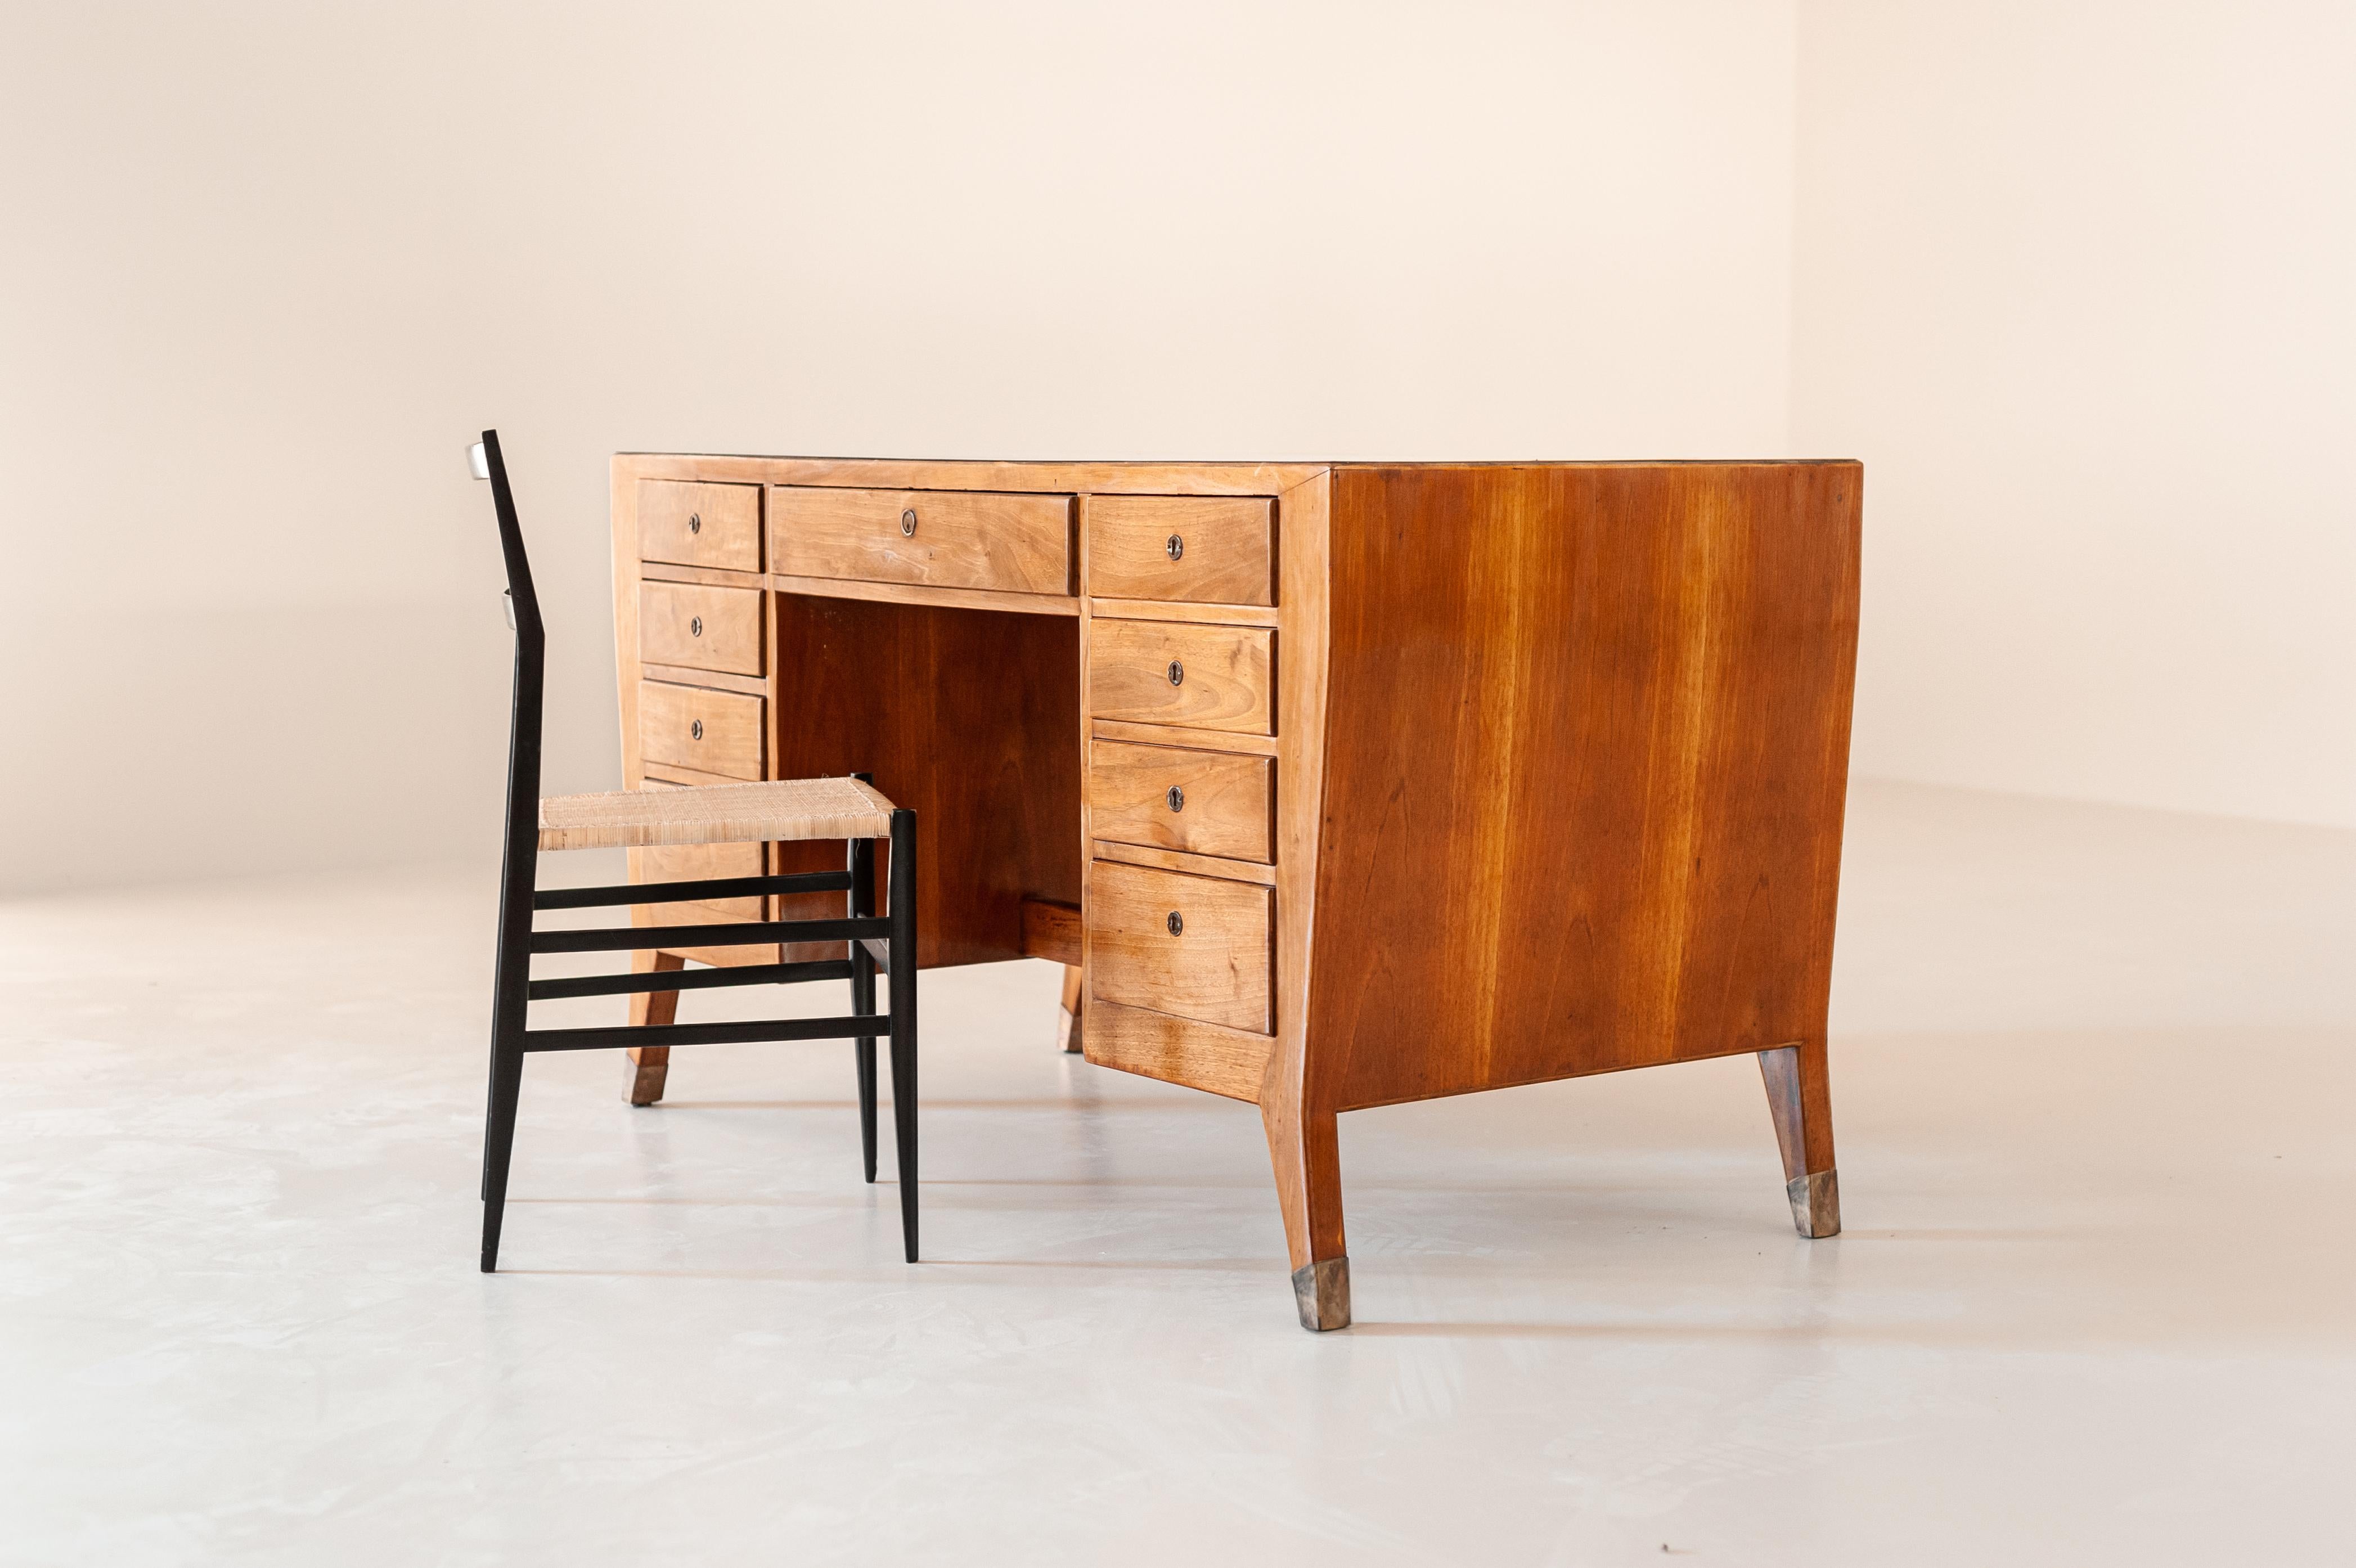 Mid-20th Century Gio Ponti Writing Desk in Walnut and Brass for the BNL Offices, Italy 1940s For Sale